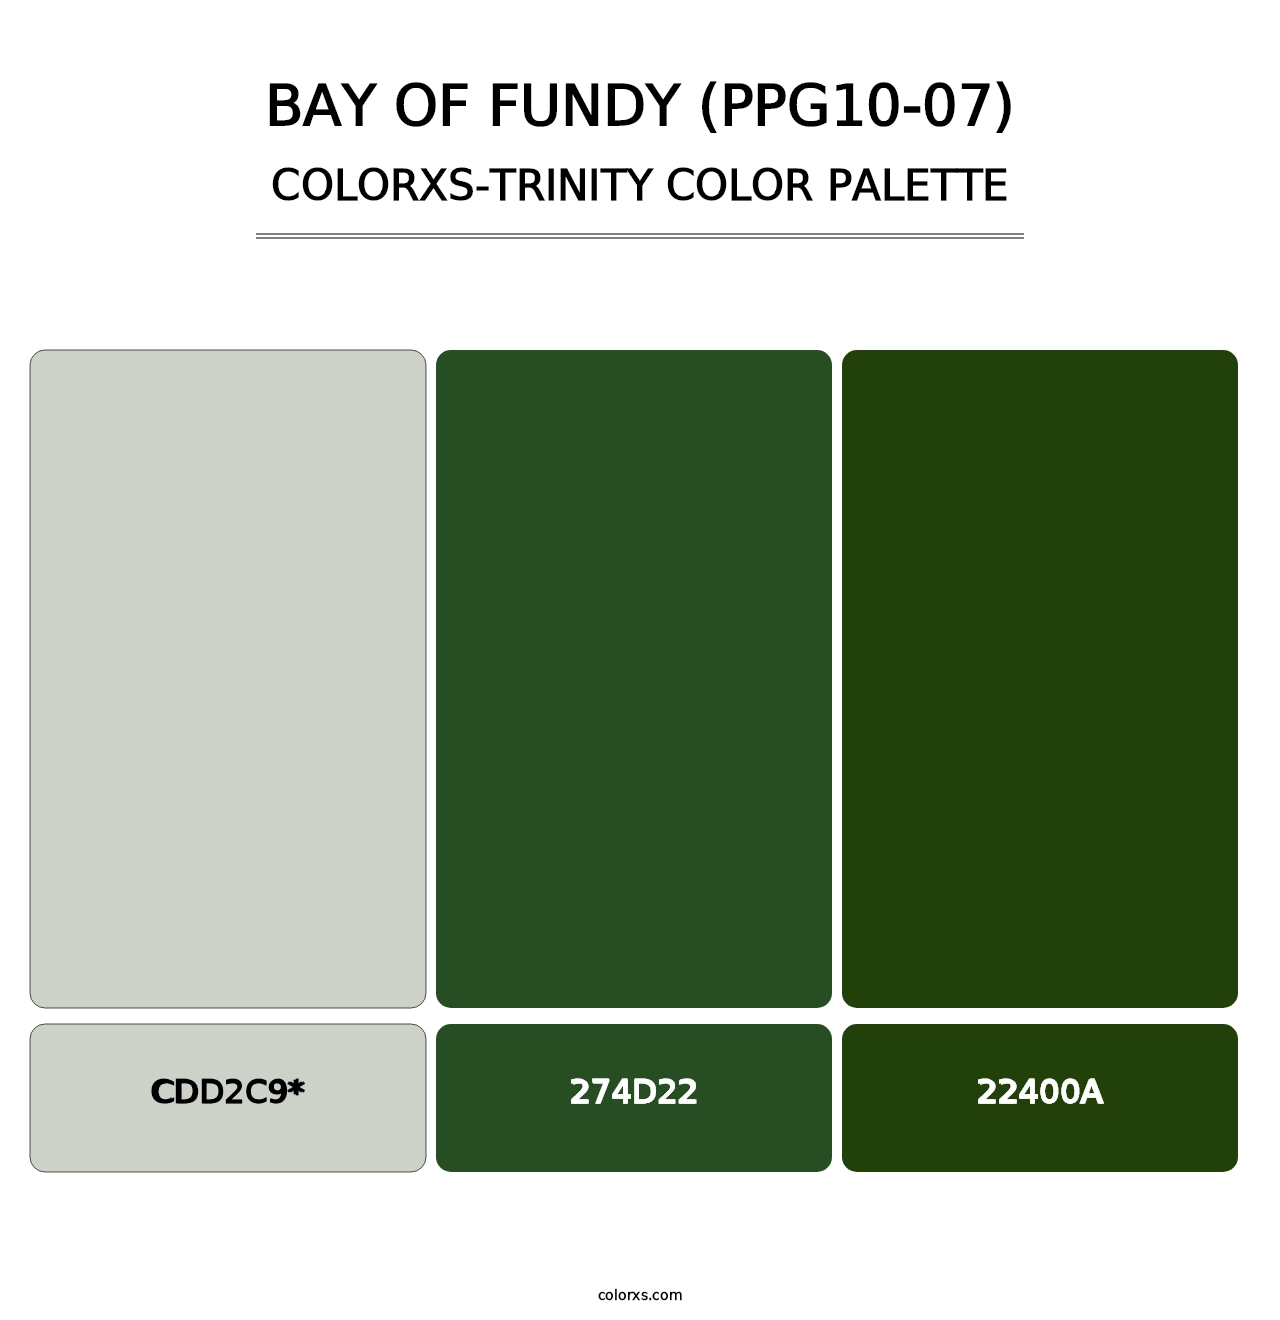 Bay Of Fundy (PPG10-07) - Colorxs Trinity Palette